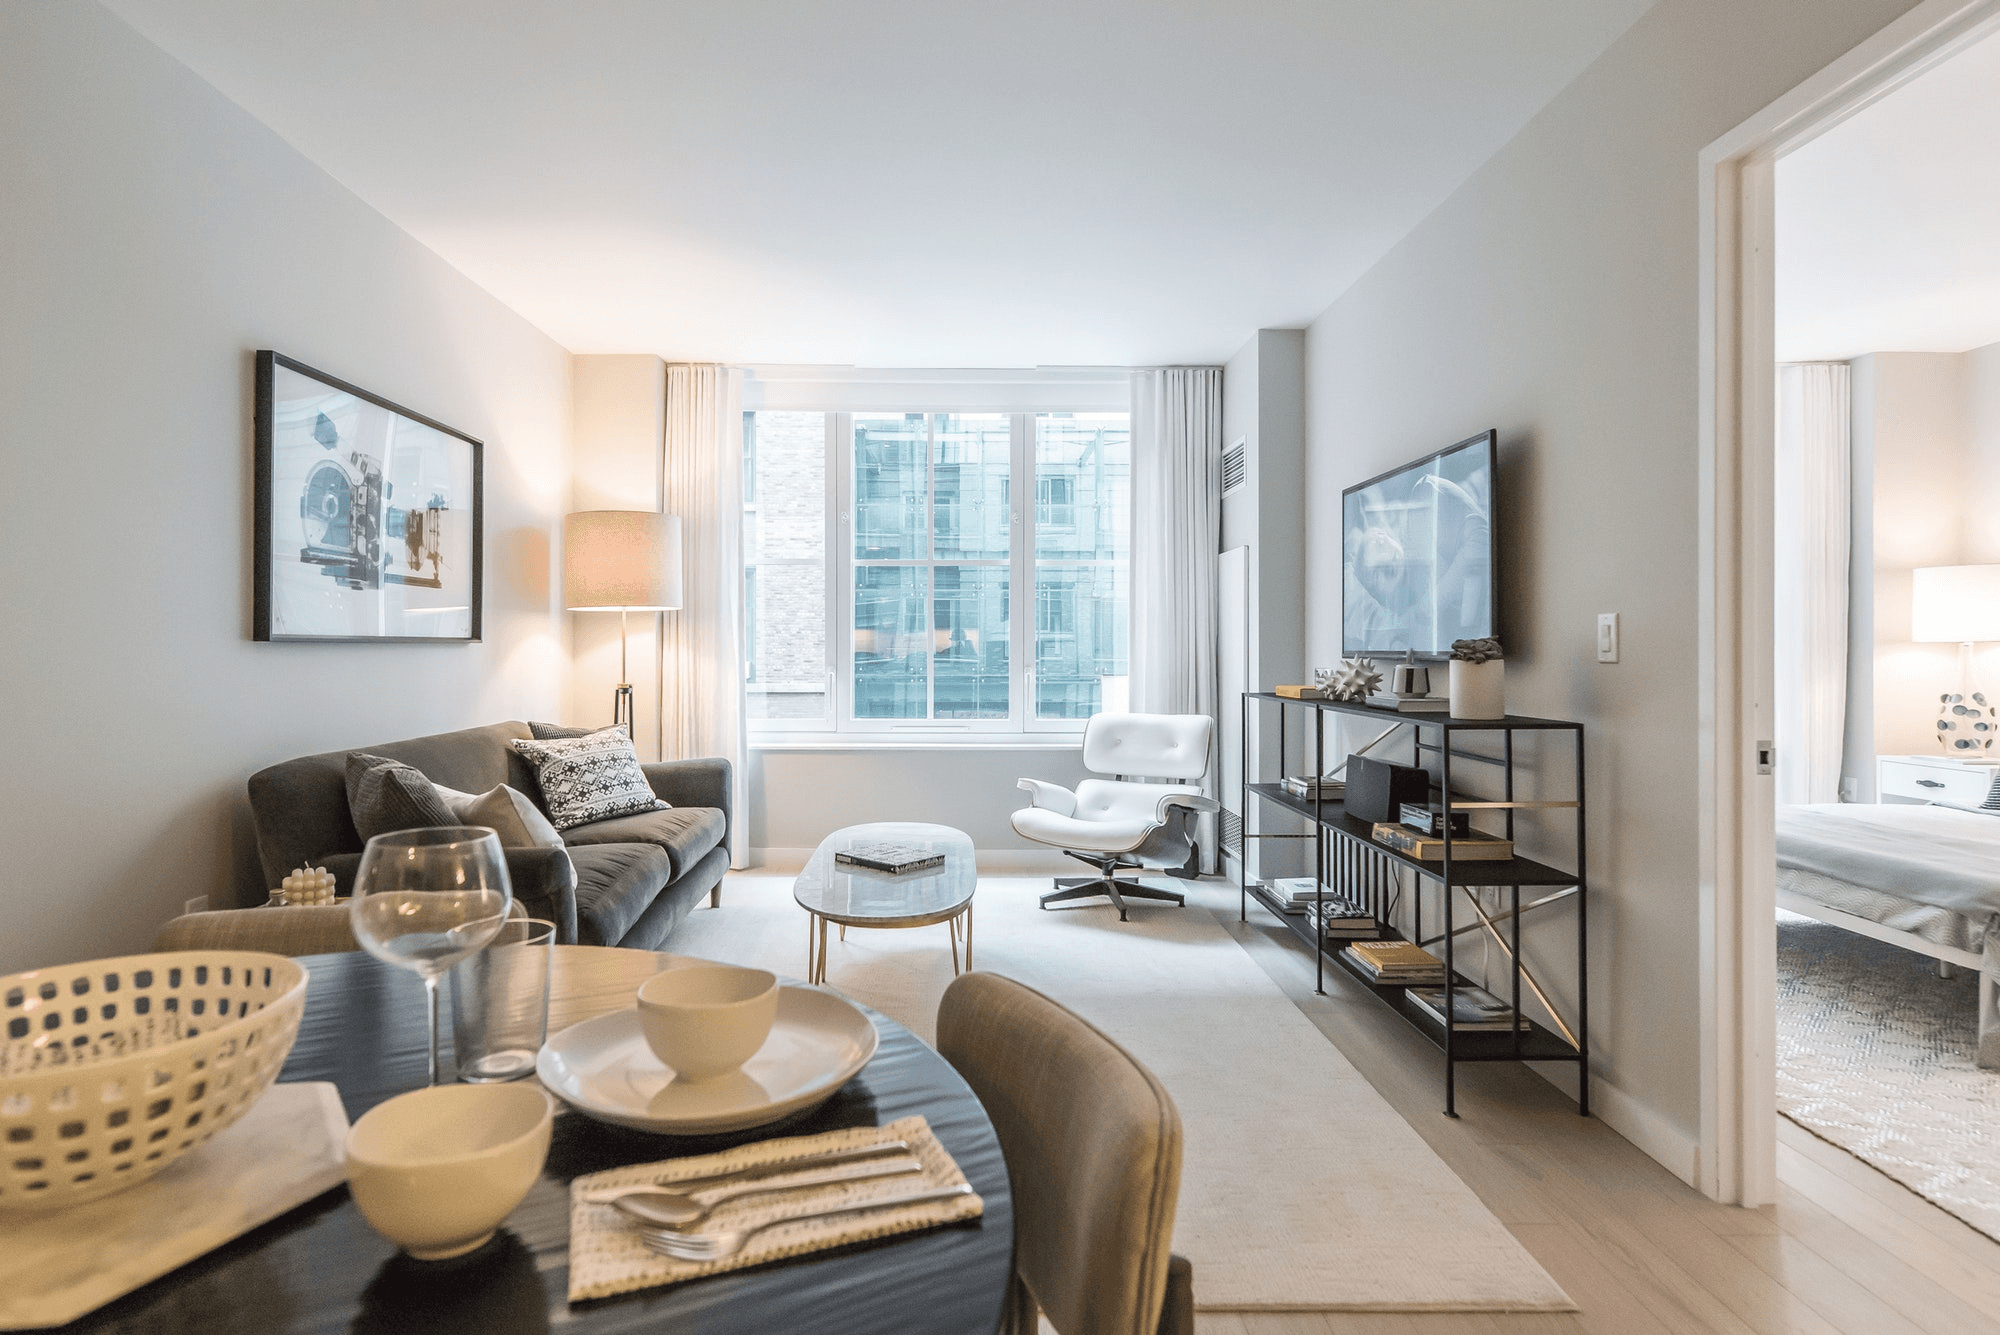 Magnificent 2 Bedroom 2 Bathroom in the heart of Hell's Kitchen (Midtown West). Full Service Luxury Building with Doorman/Gym/Playroom, etc. *NO FEE*